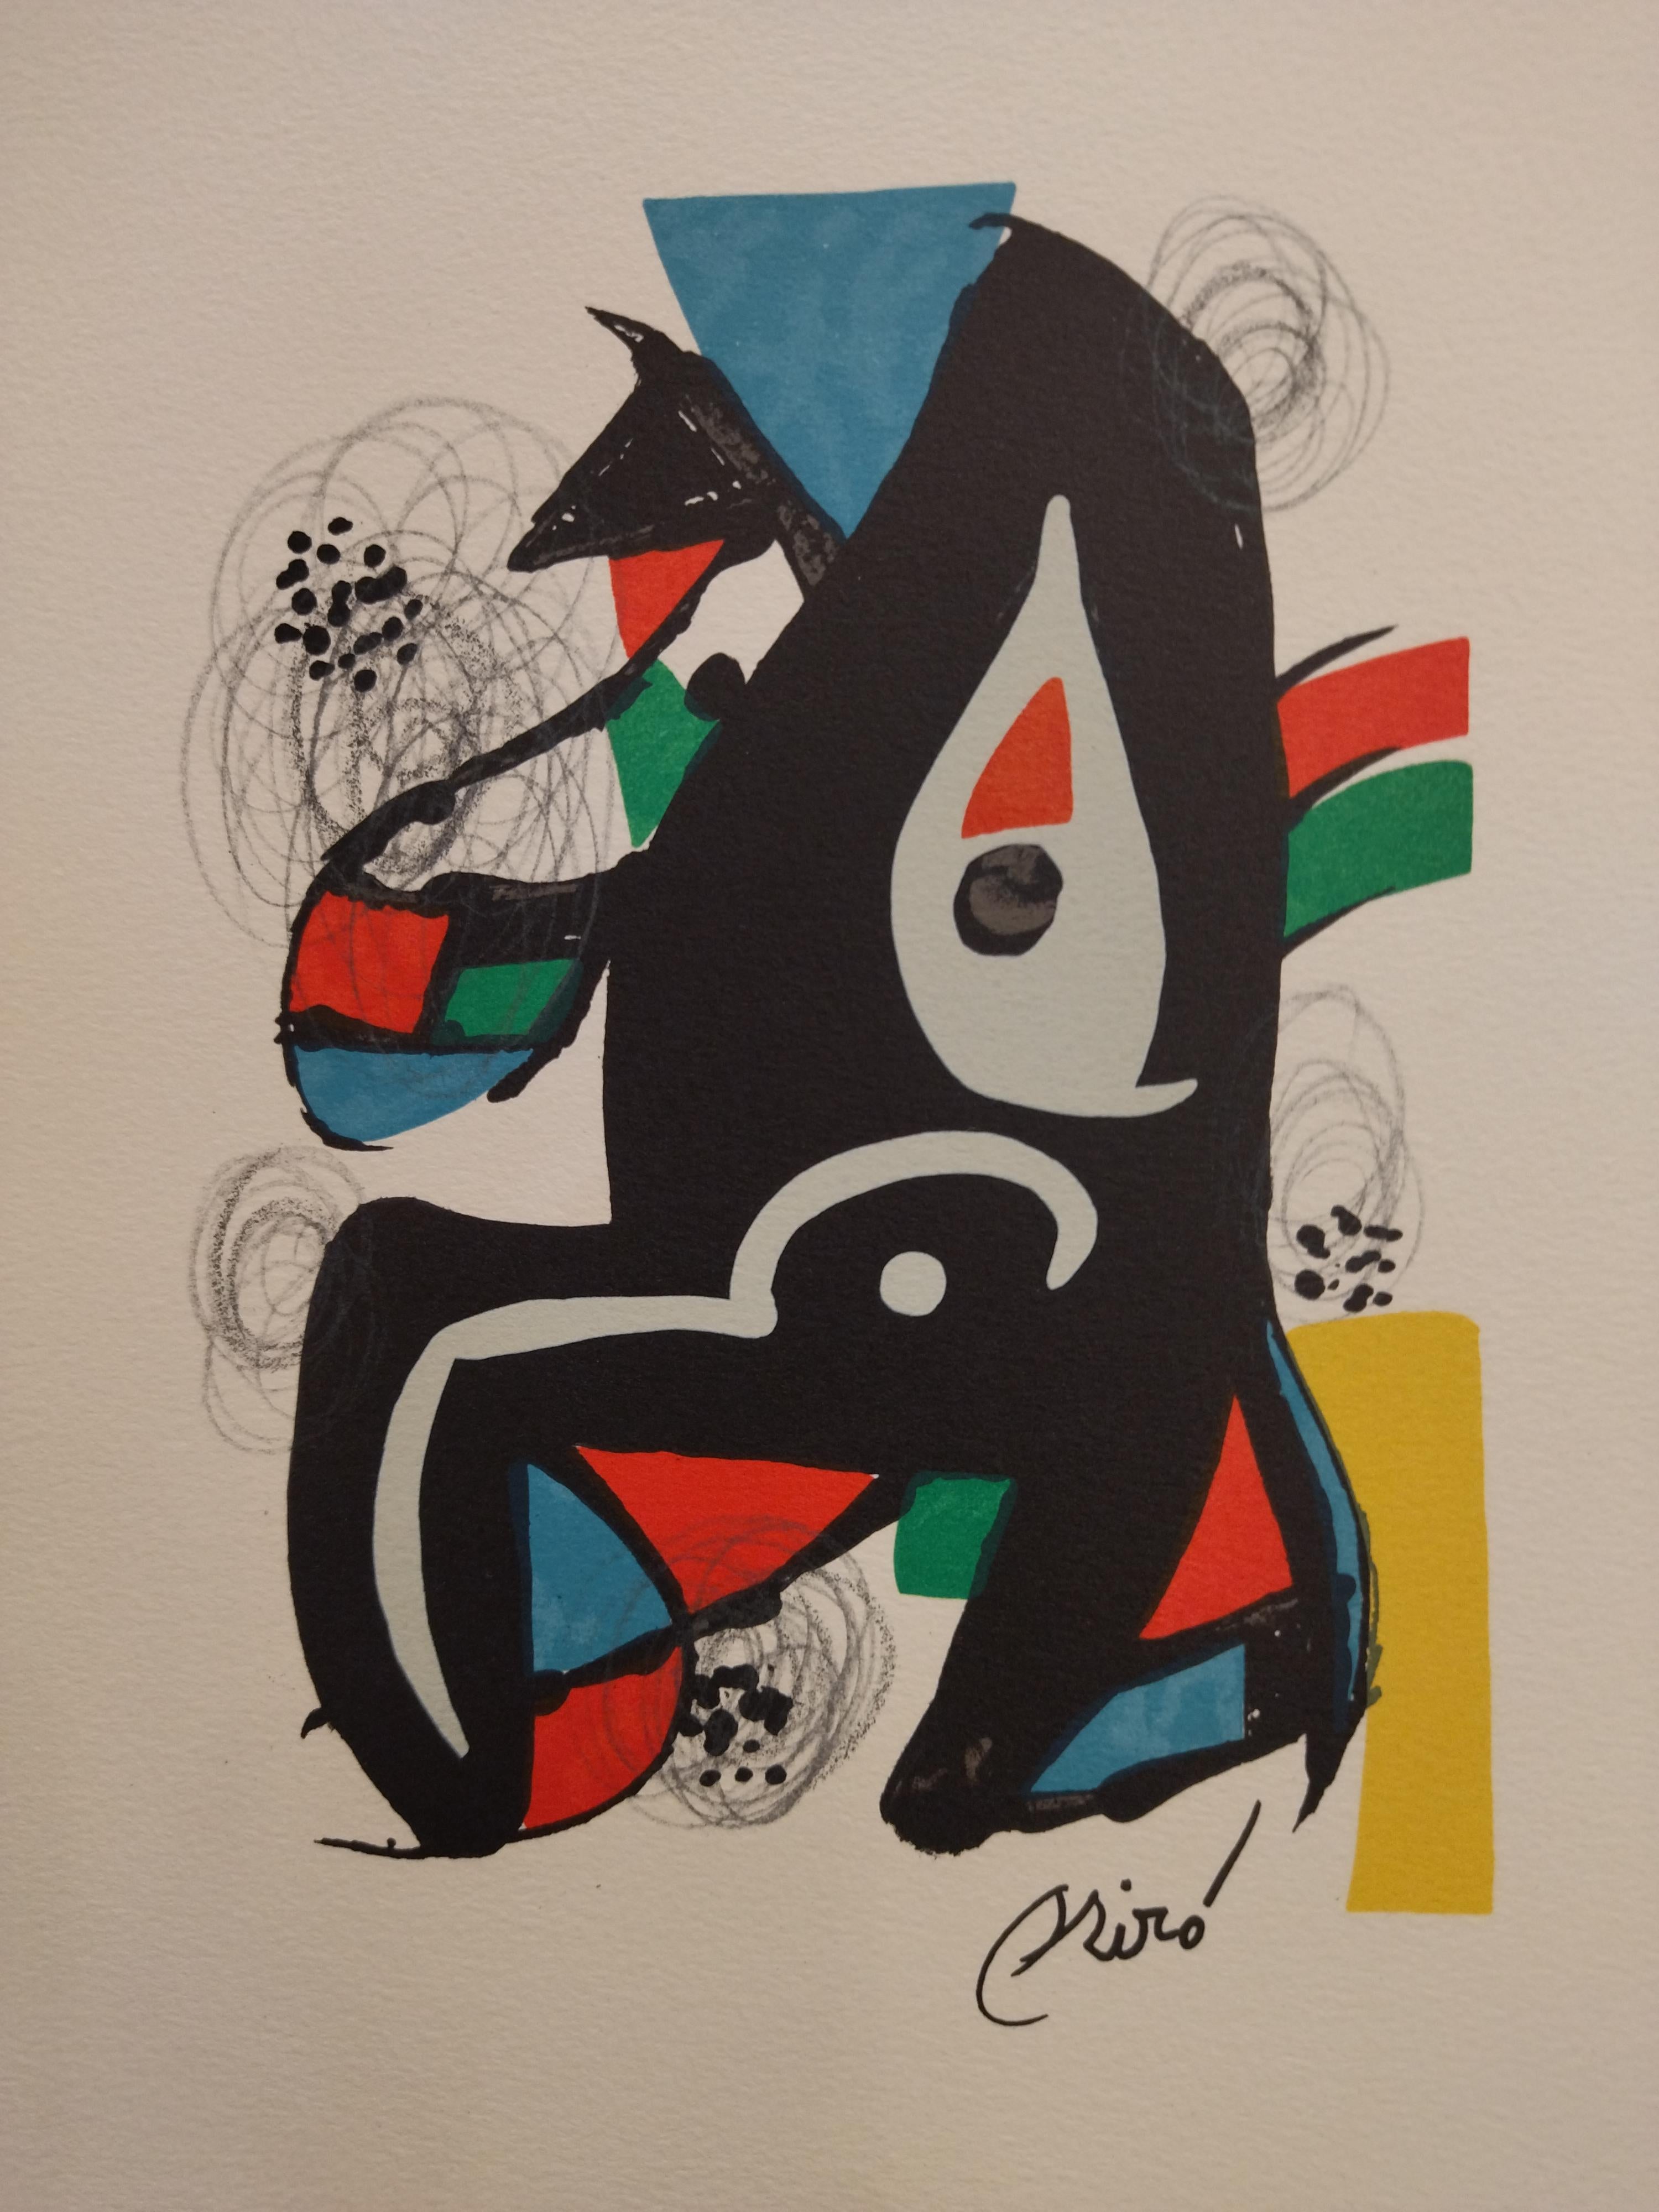 Miro    Little La melodie acide. original lithograph painting.  - Abstract Expressionist Print by Joan Miró